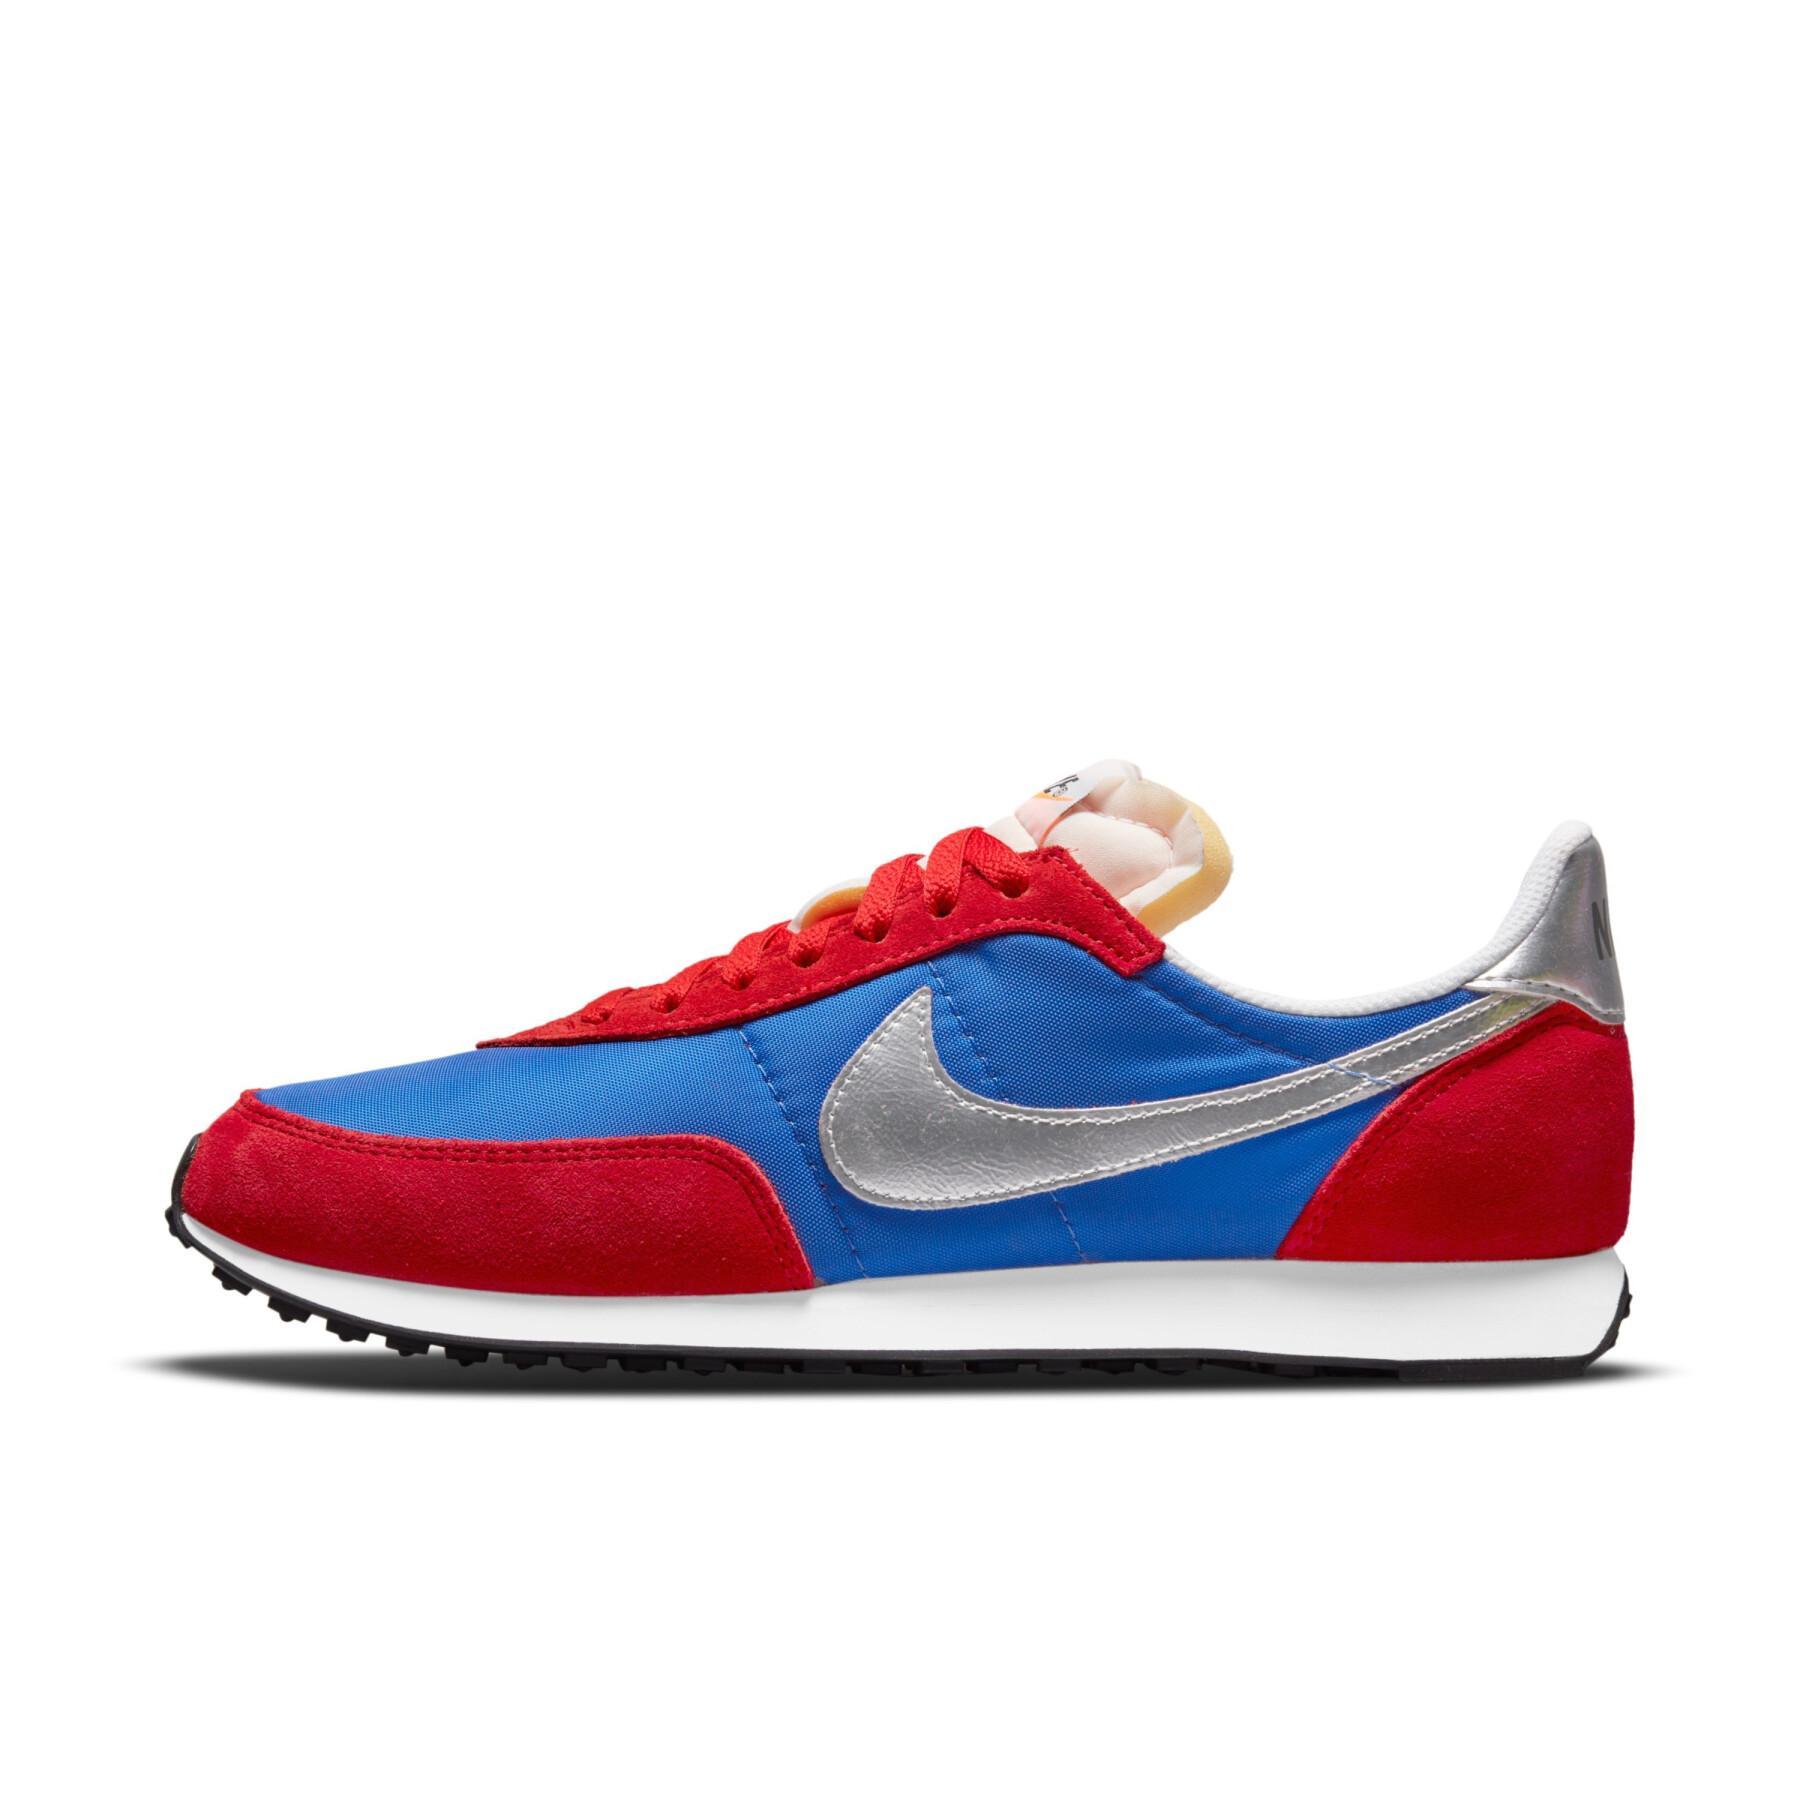 Formadores Nike Waffle Trainer 2 Sp